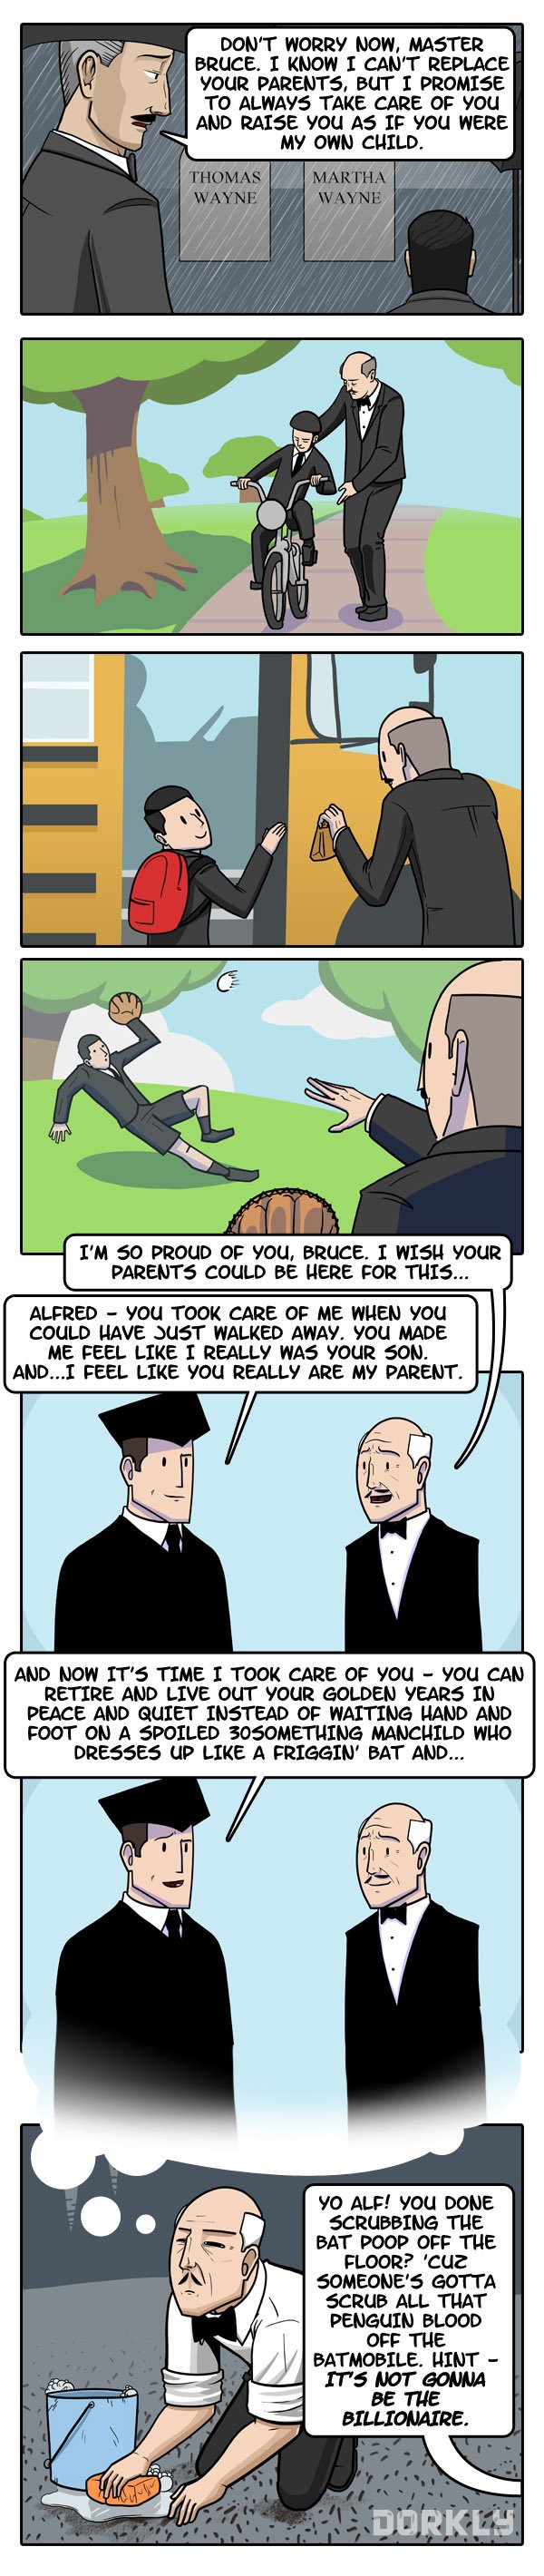 poor alfred